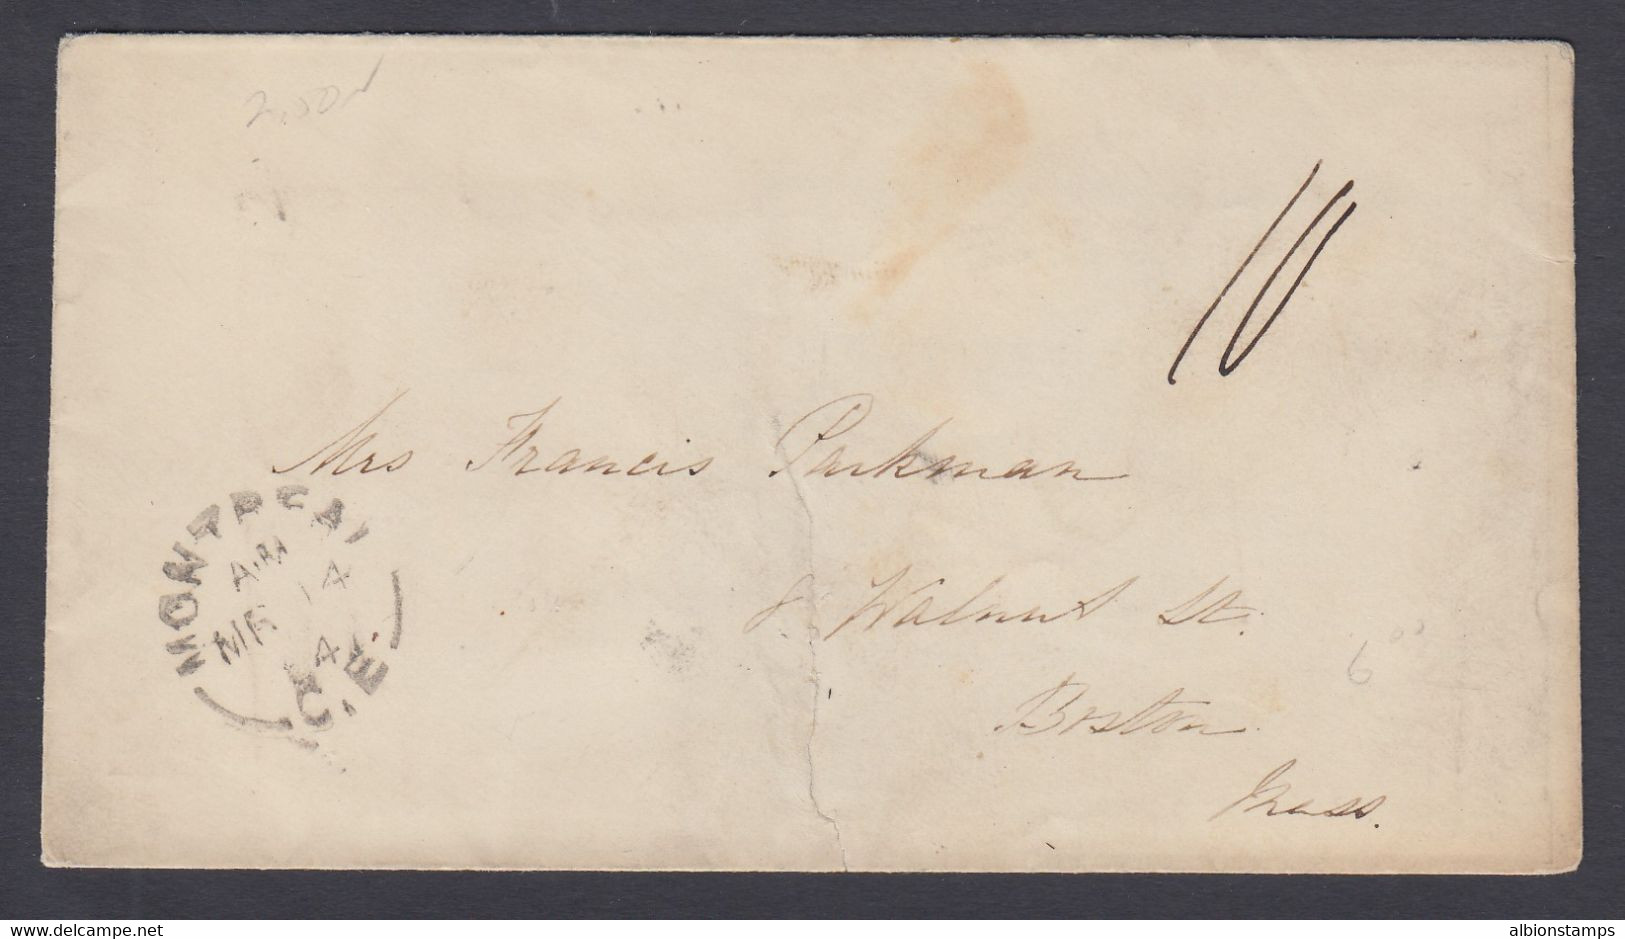 Canada 1864 Stampless Cover, Montreal To Boston Mass - ...-1851 Prephilately